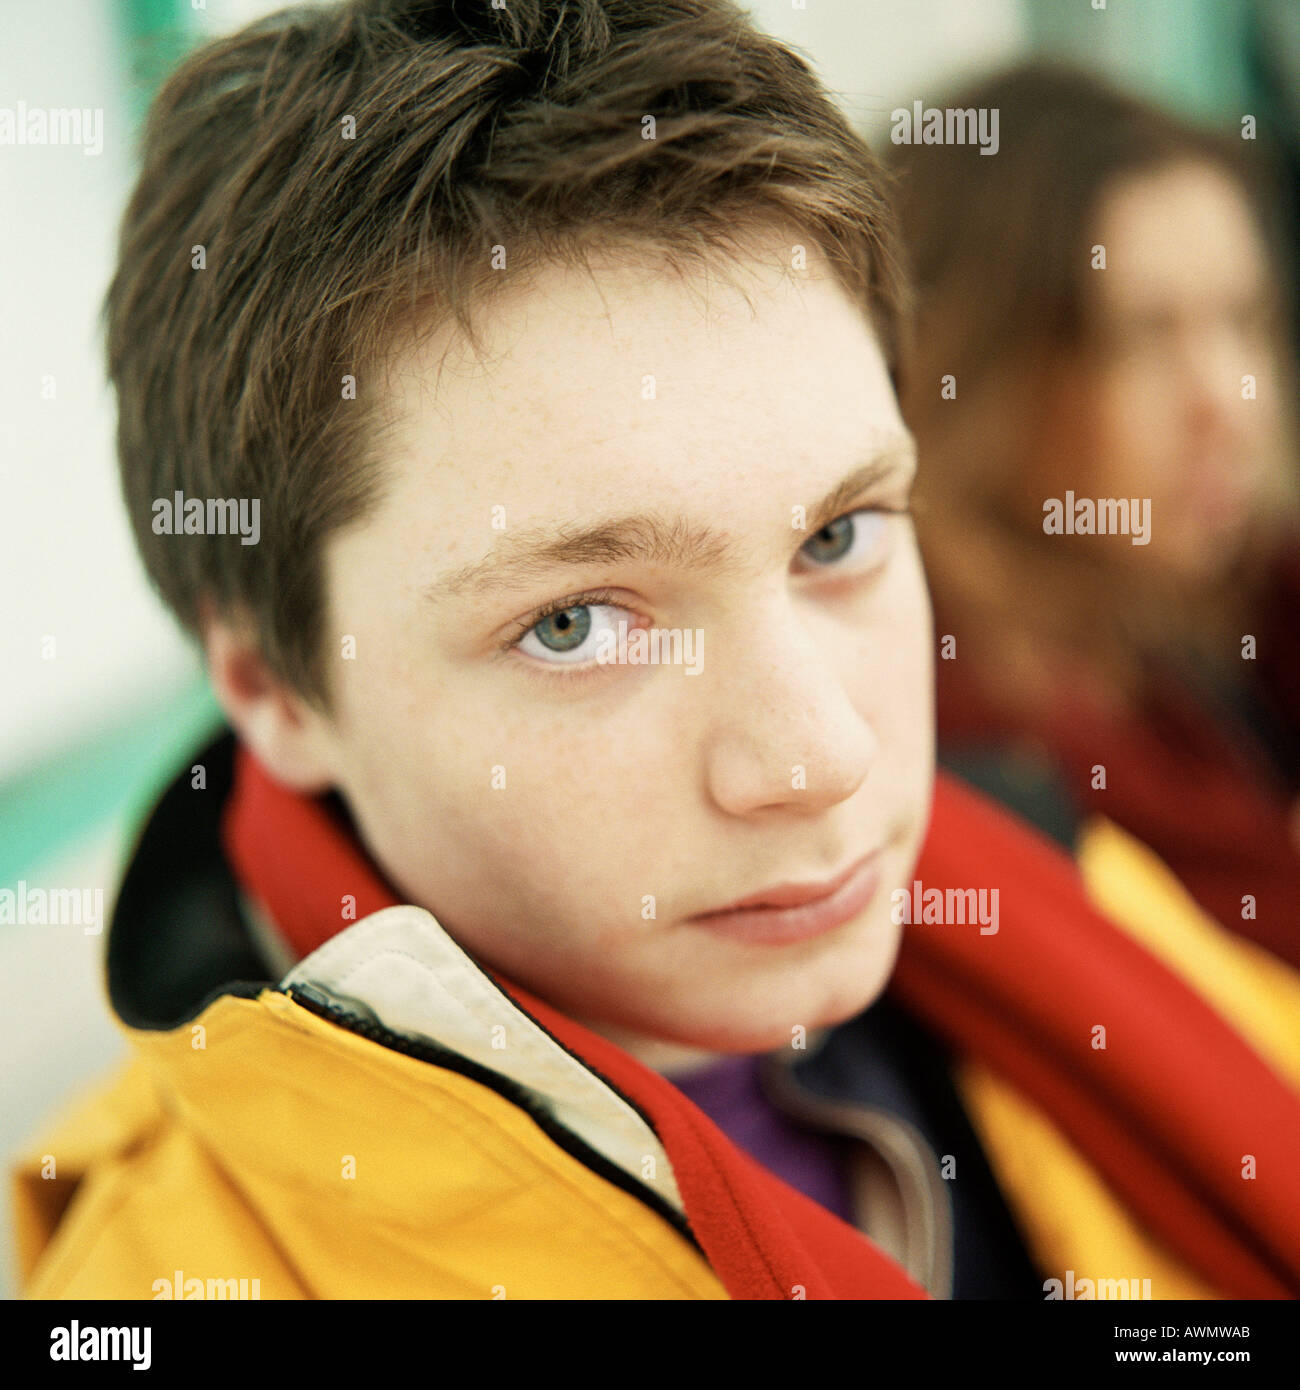 Young man looking at camera, close up portrait. Stock Photo